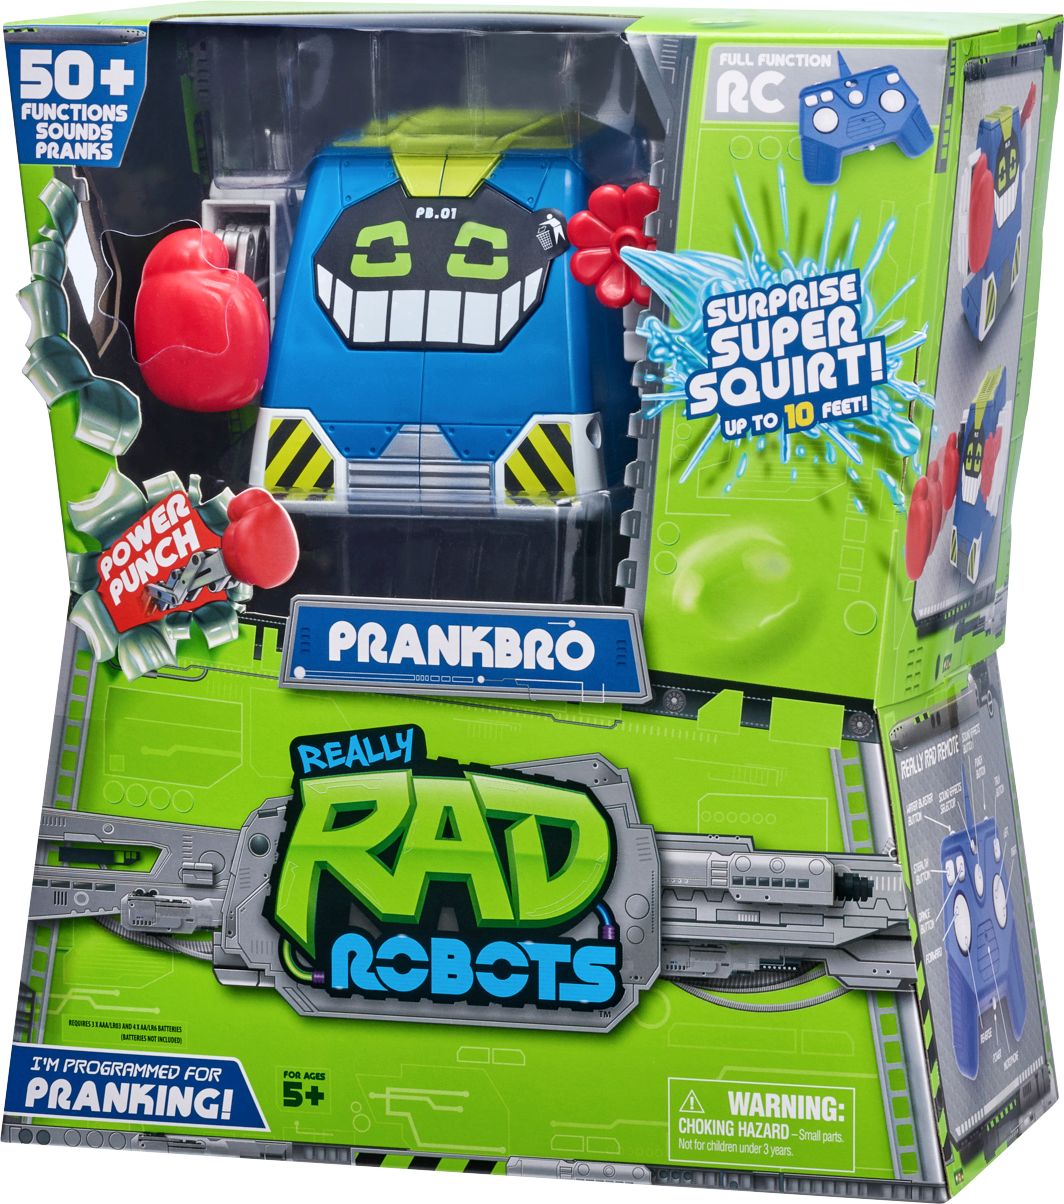 Prankbro 50 Functions for sale online Really Rad Robots 